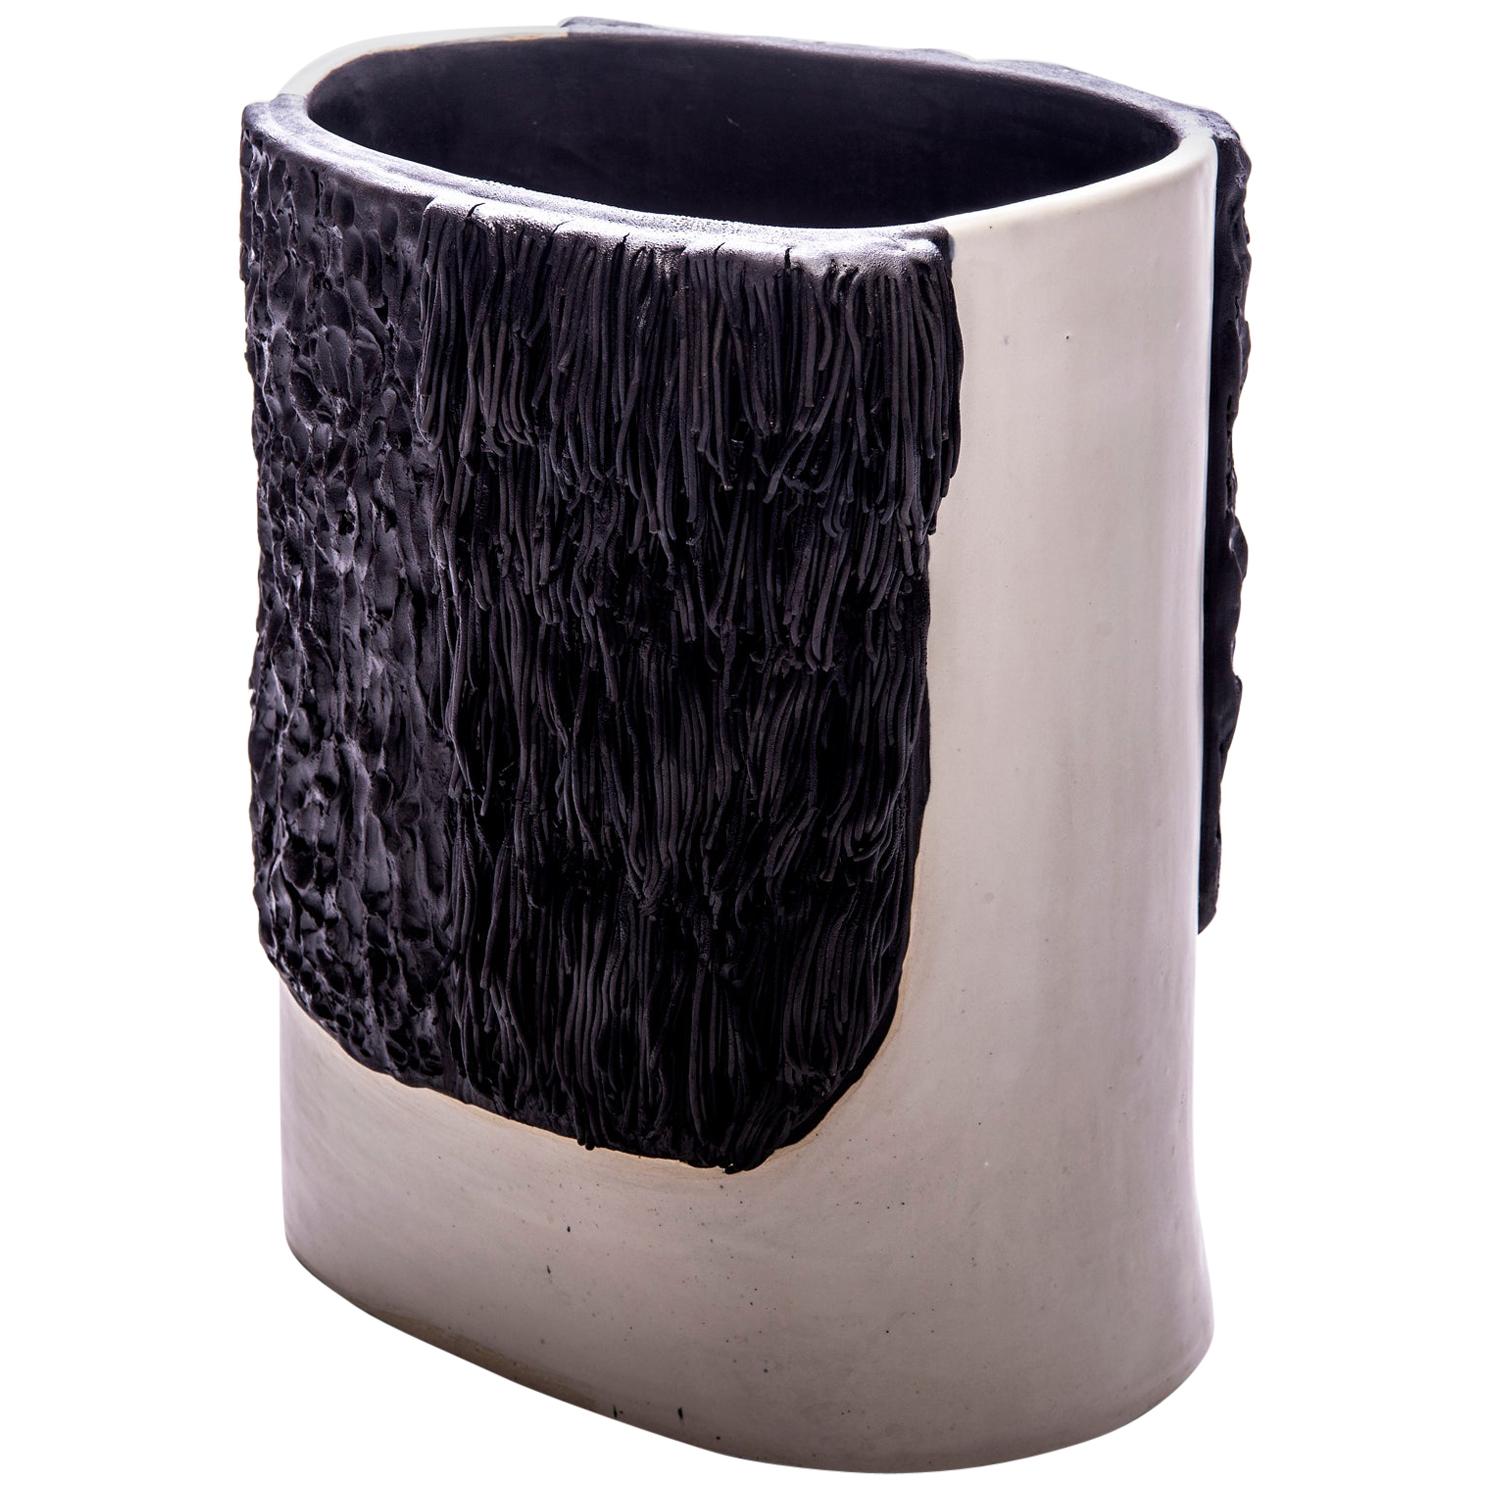 Bruno Vessel in Glazed Ceramic from the Moderno Collection by Trish DeMasi